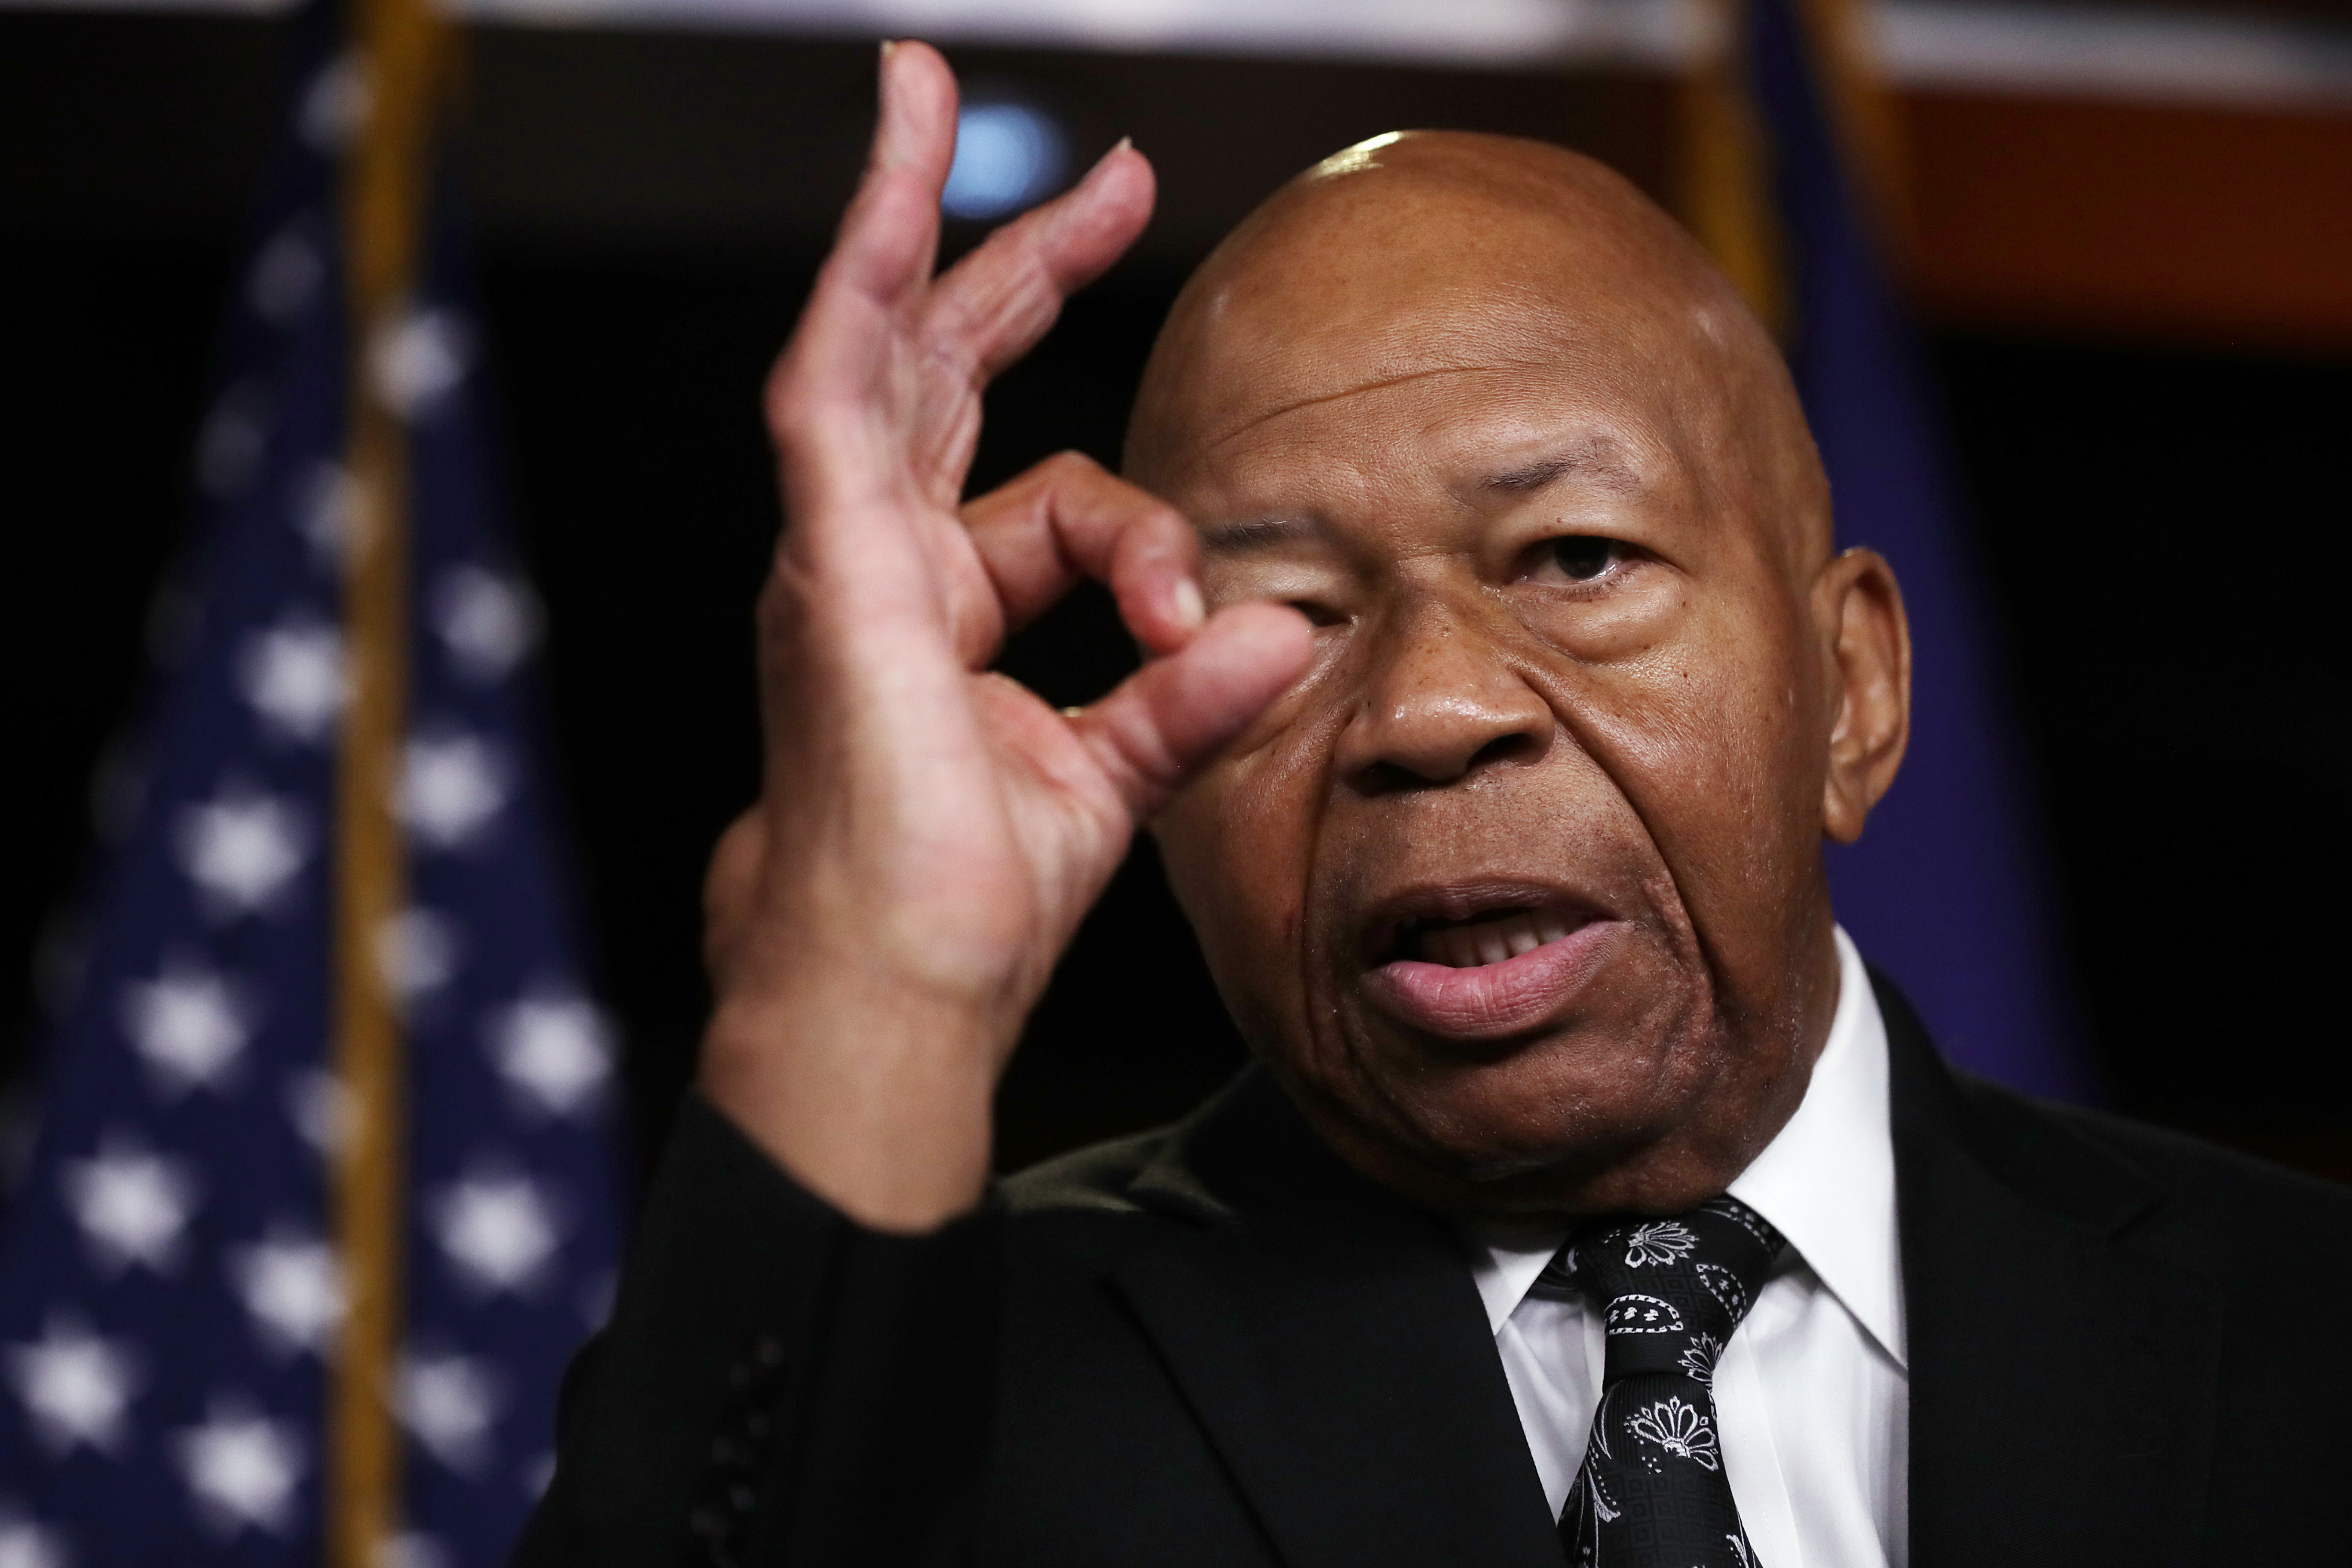 House Oversight and Government Reform Committee chairman Elijah Cummings (D-MD) speaks to the press on June 11, 2019 on Capitol Hill. (Chip Somodevilla/Getty Images)